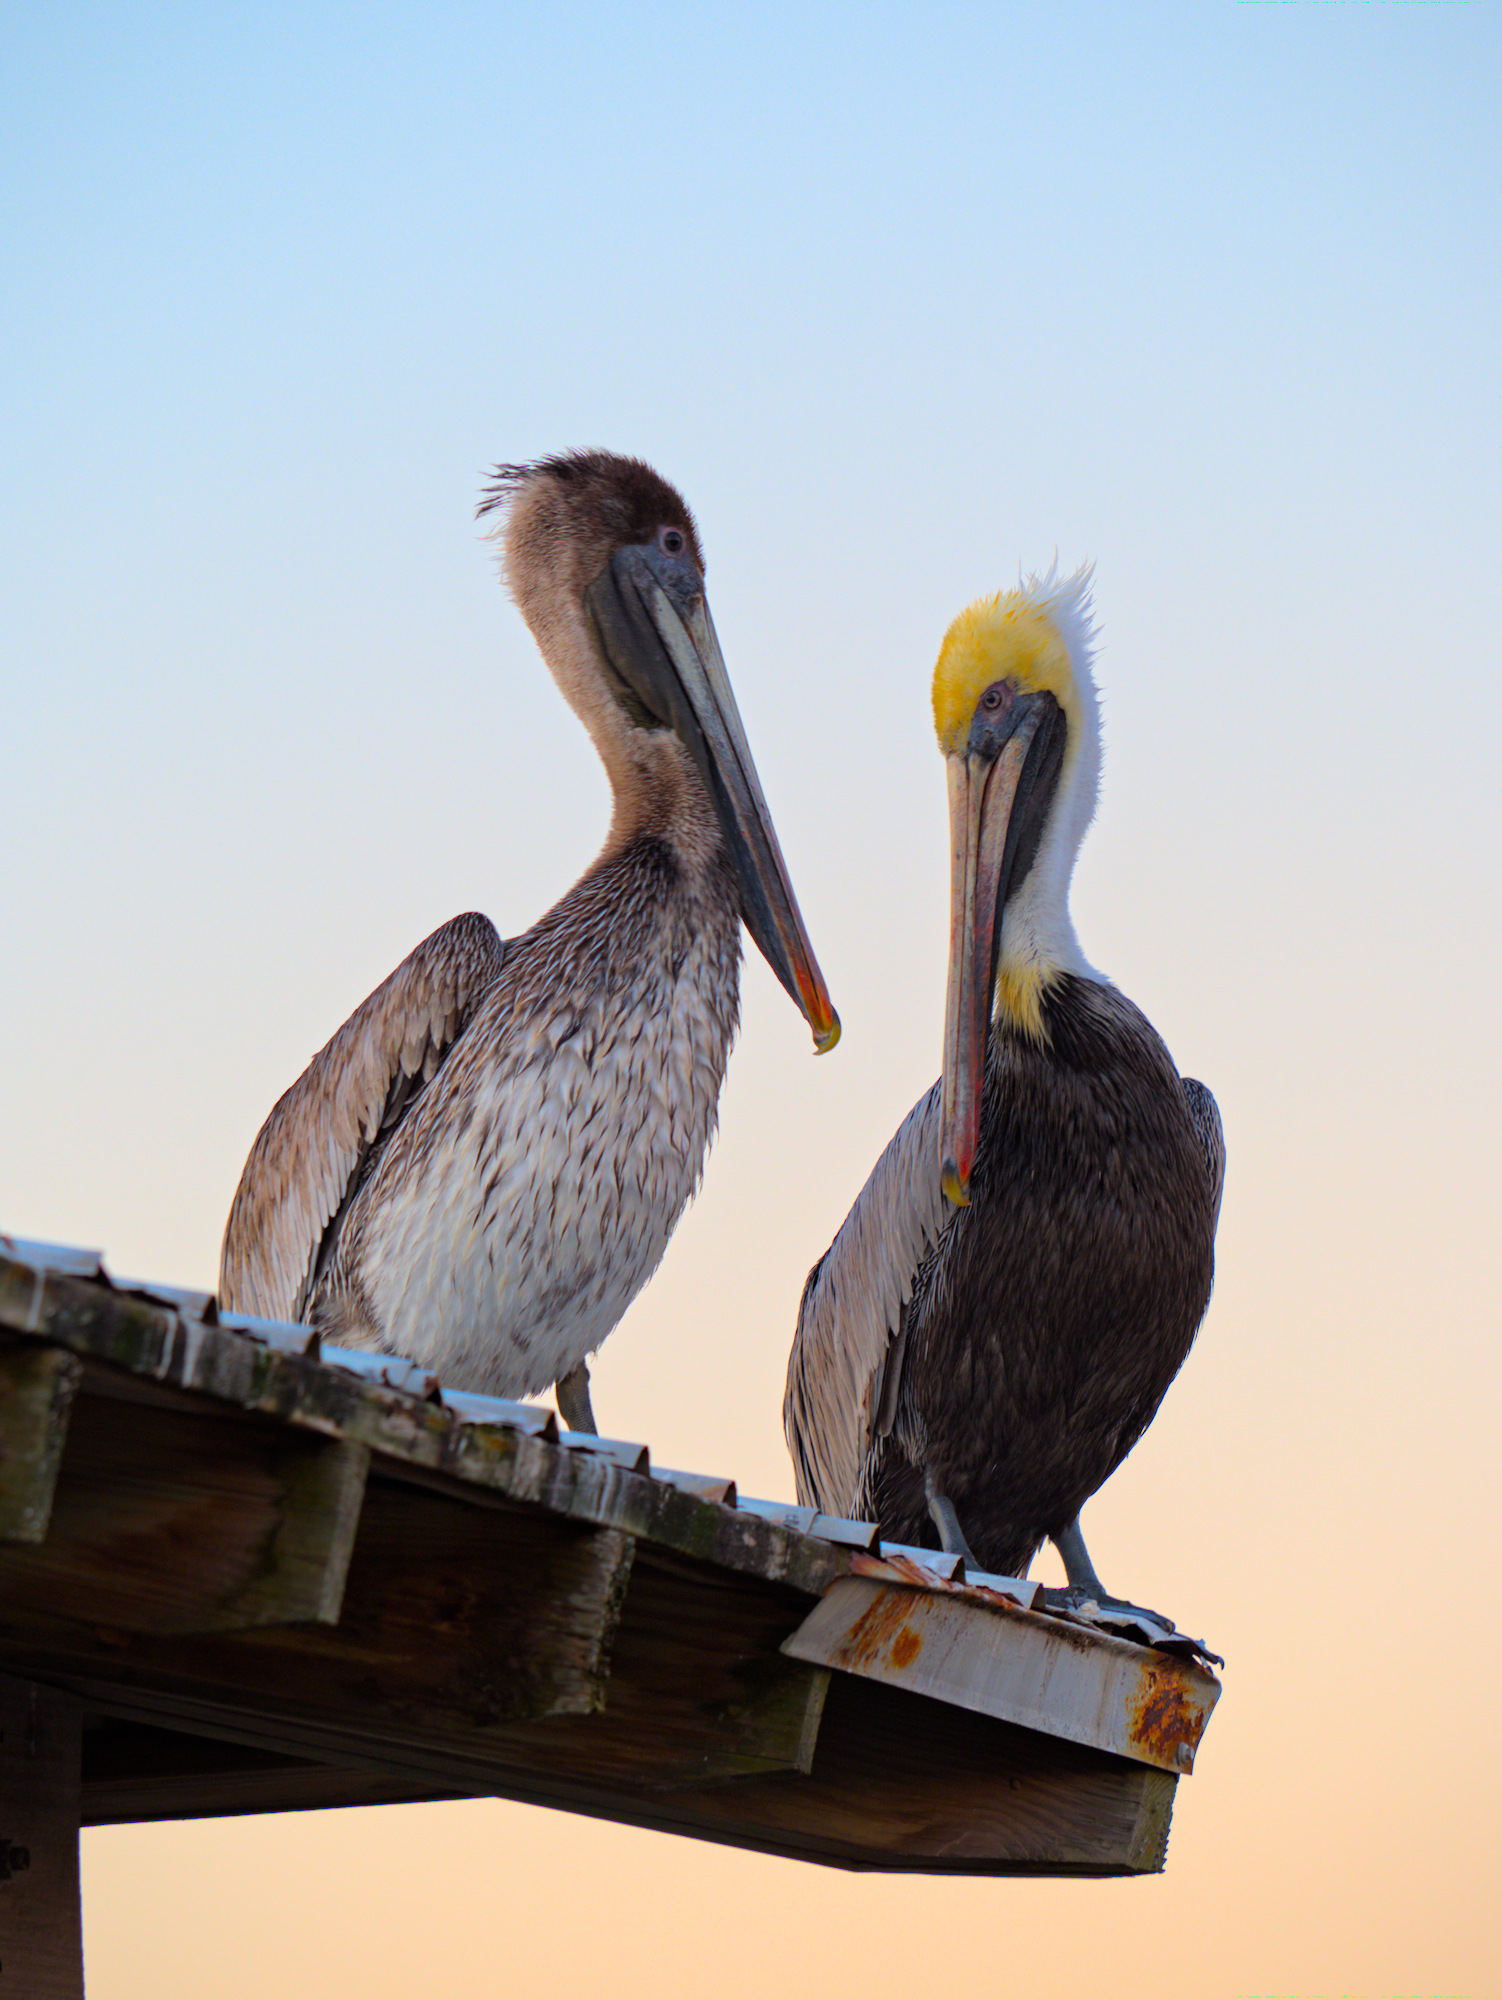 Two pelicans, a juvenile and an adult stand on a roof looking toward each other